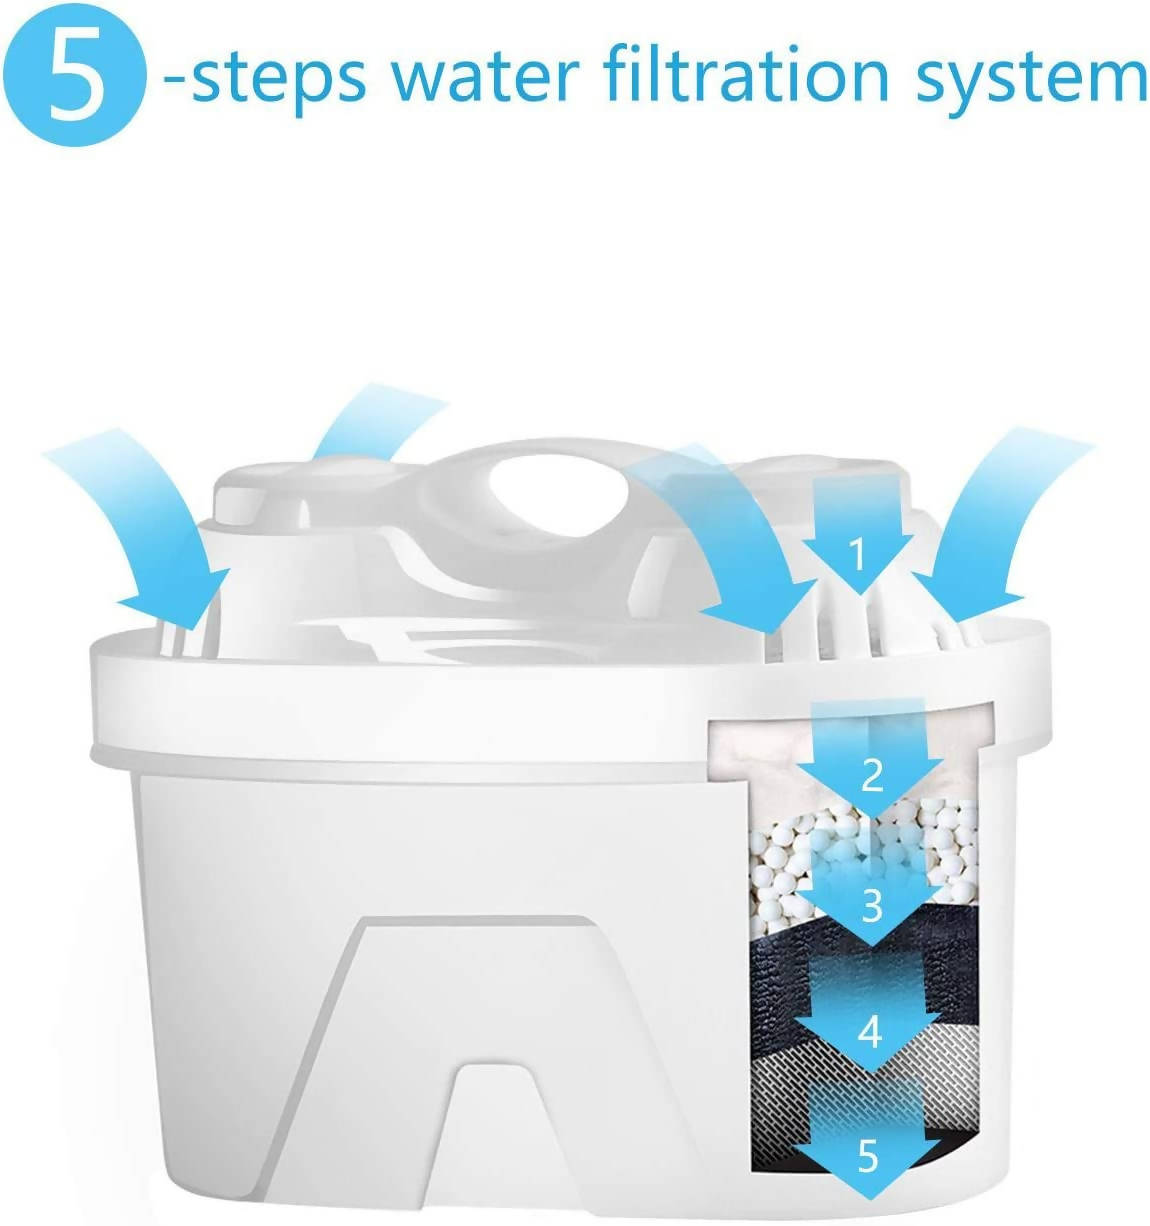 Aigostar Pure 30LDV – Blue Water Filter with 3 Filter Cartridges – Aigostar Filter Cartridges Filter Starter Pack to Reduce Lime, Chlorine, Lead, Copper & Flavour-Disrupting Substances in Water